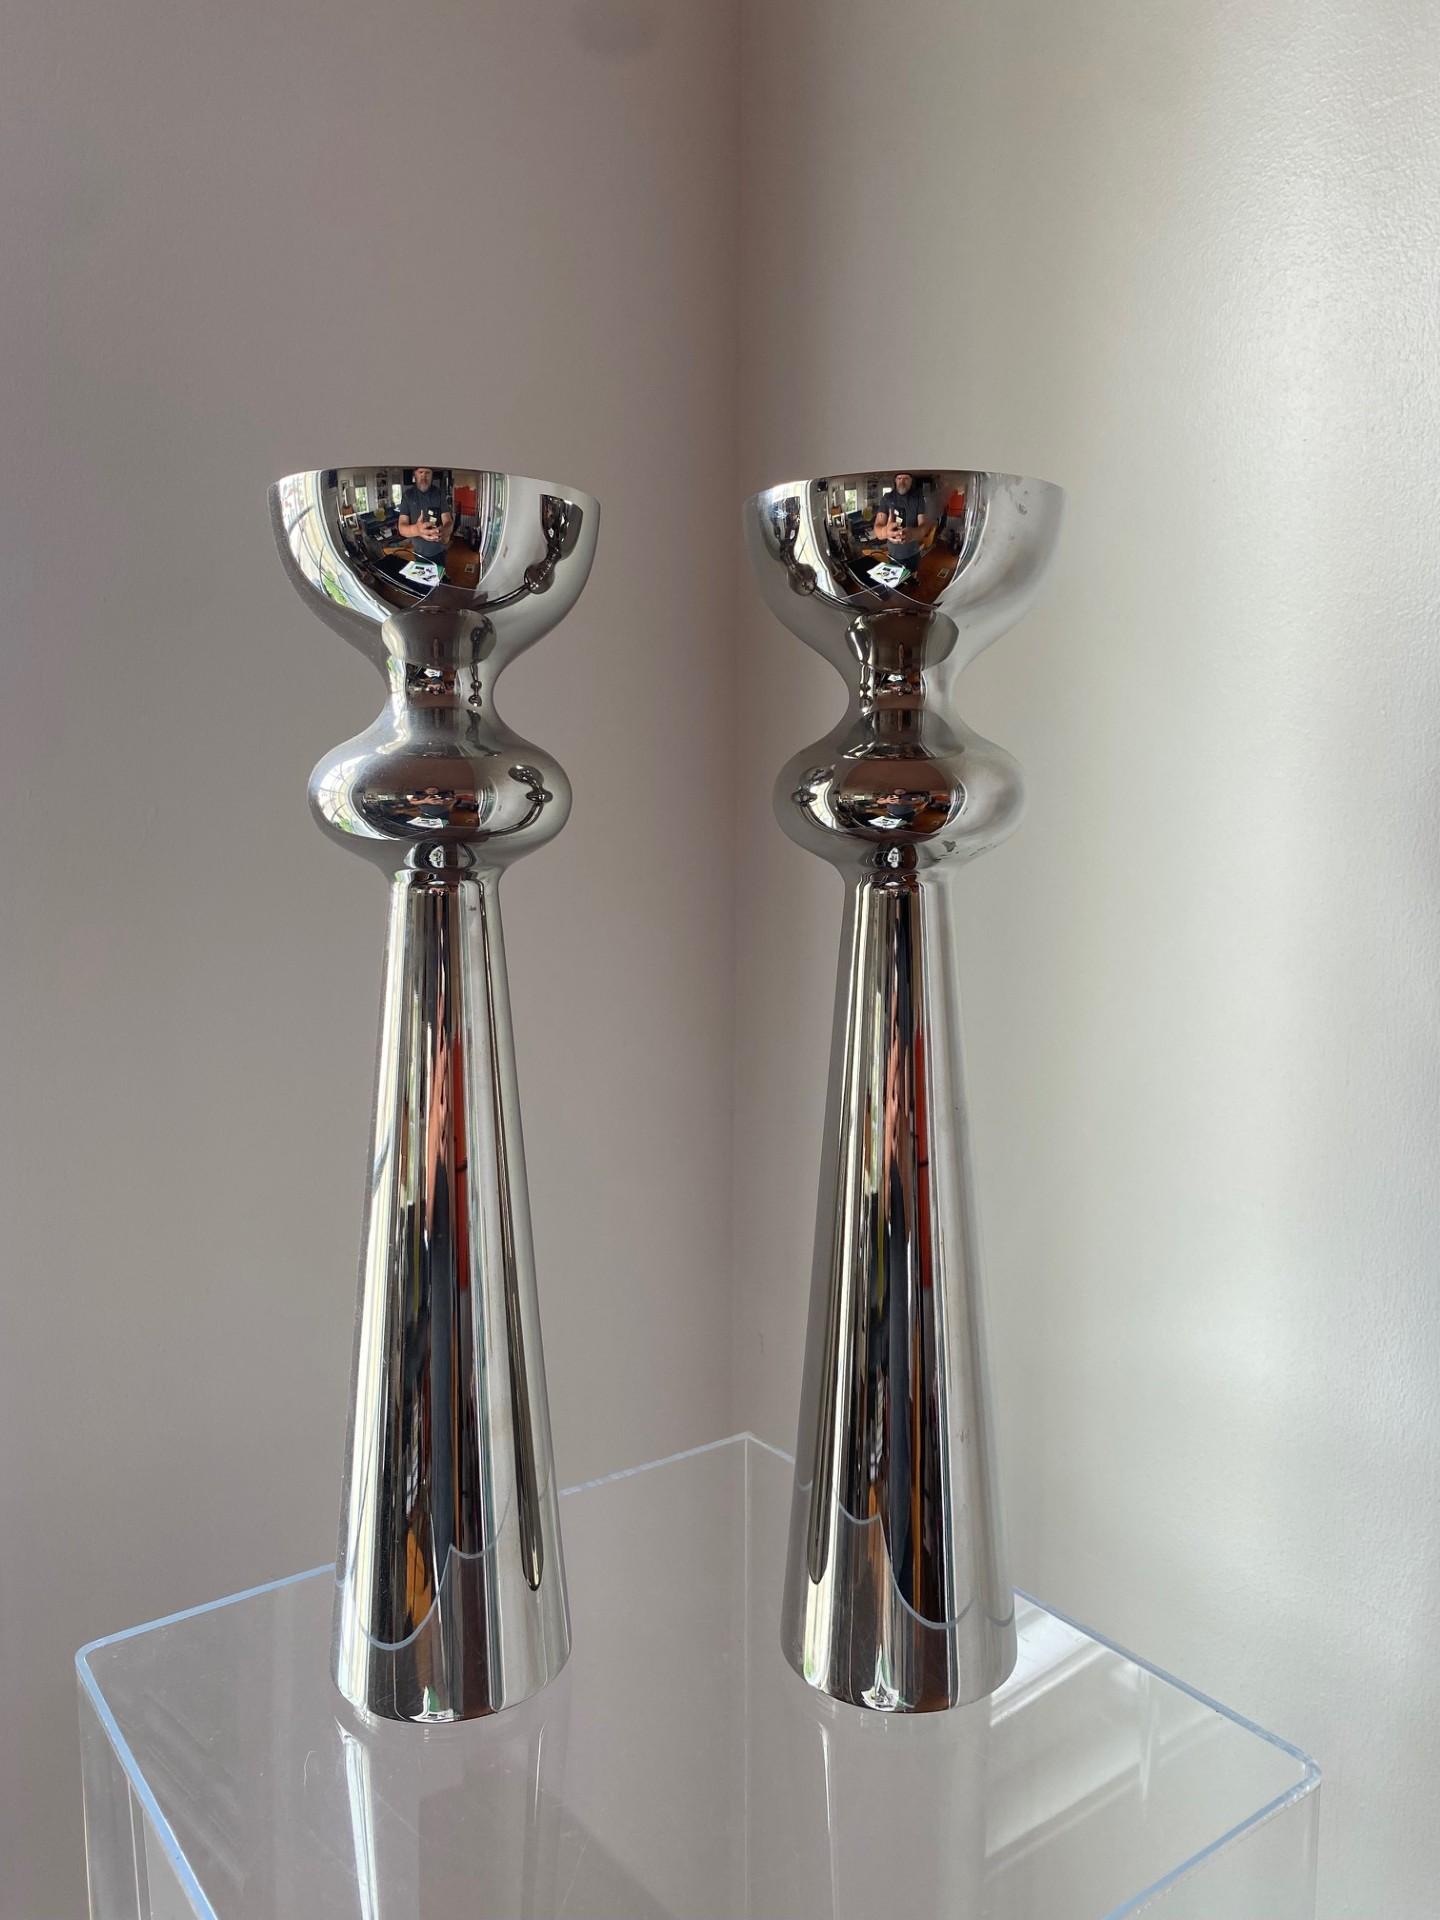 Incredibly sculptural pair of polished stainless steel vases by Georg Jensen.  This pair stands alone by themselves with their beauty.  The substantial height combined with the chrome finish radiate a minimalist radiant glow in any space that holds